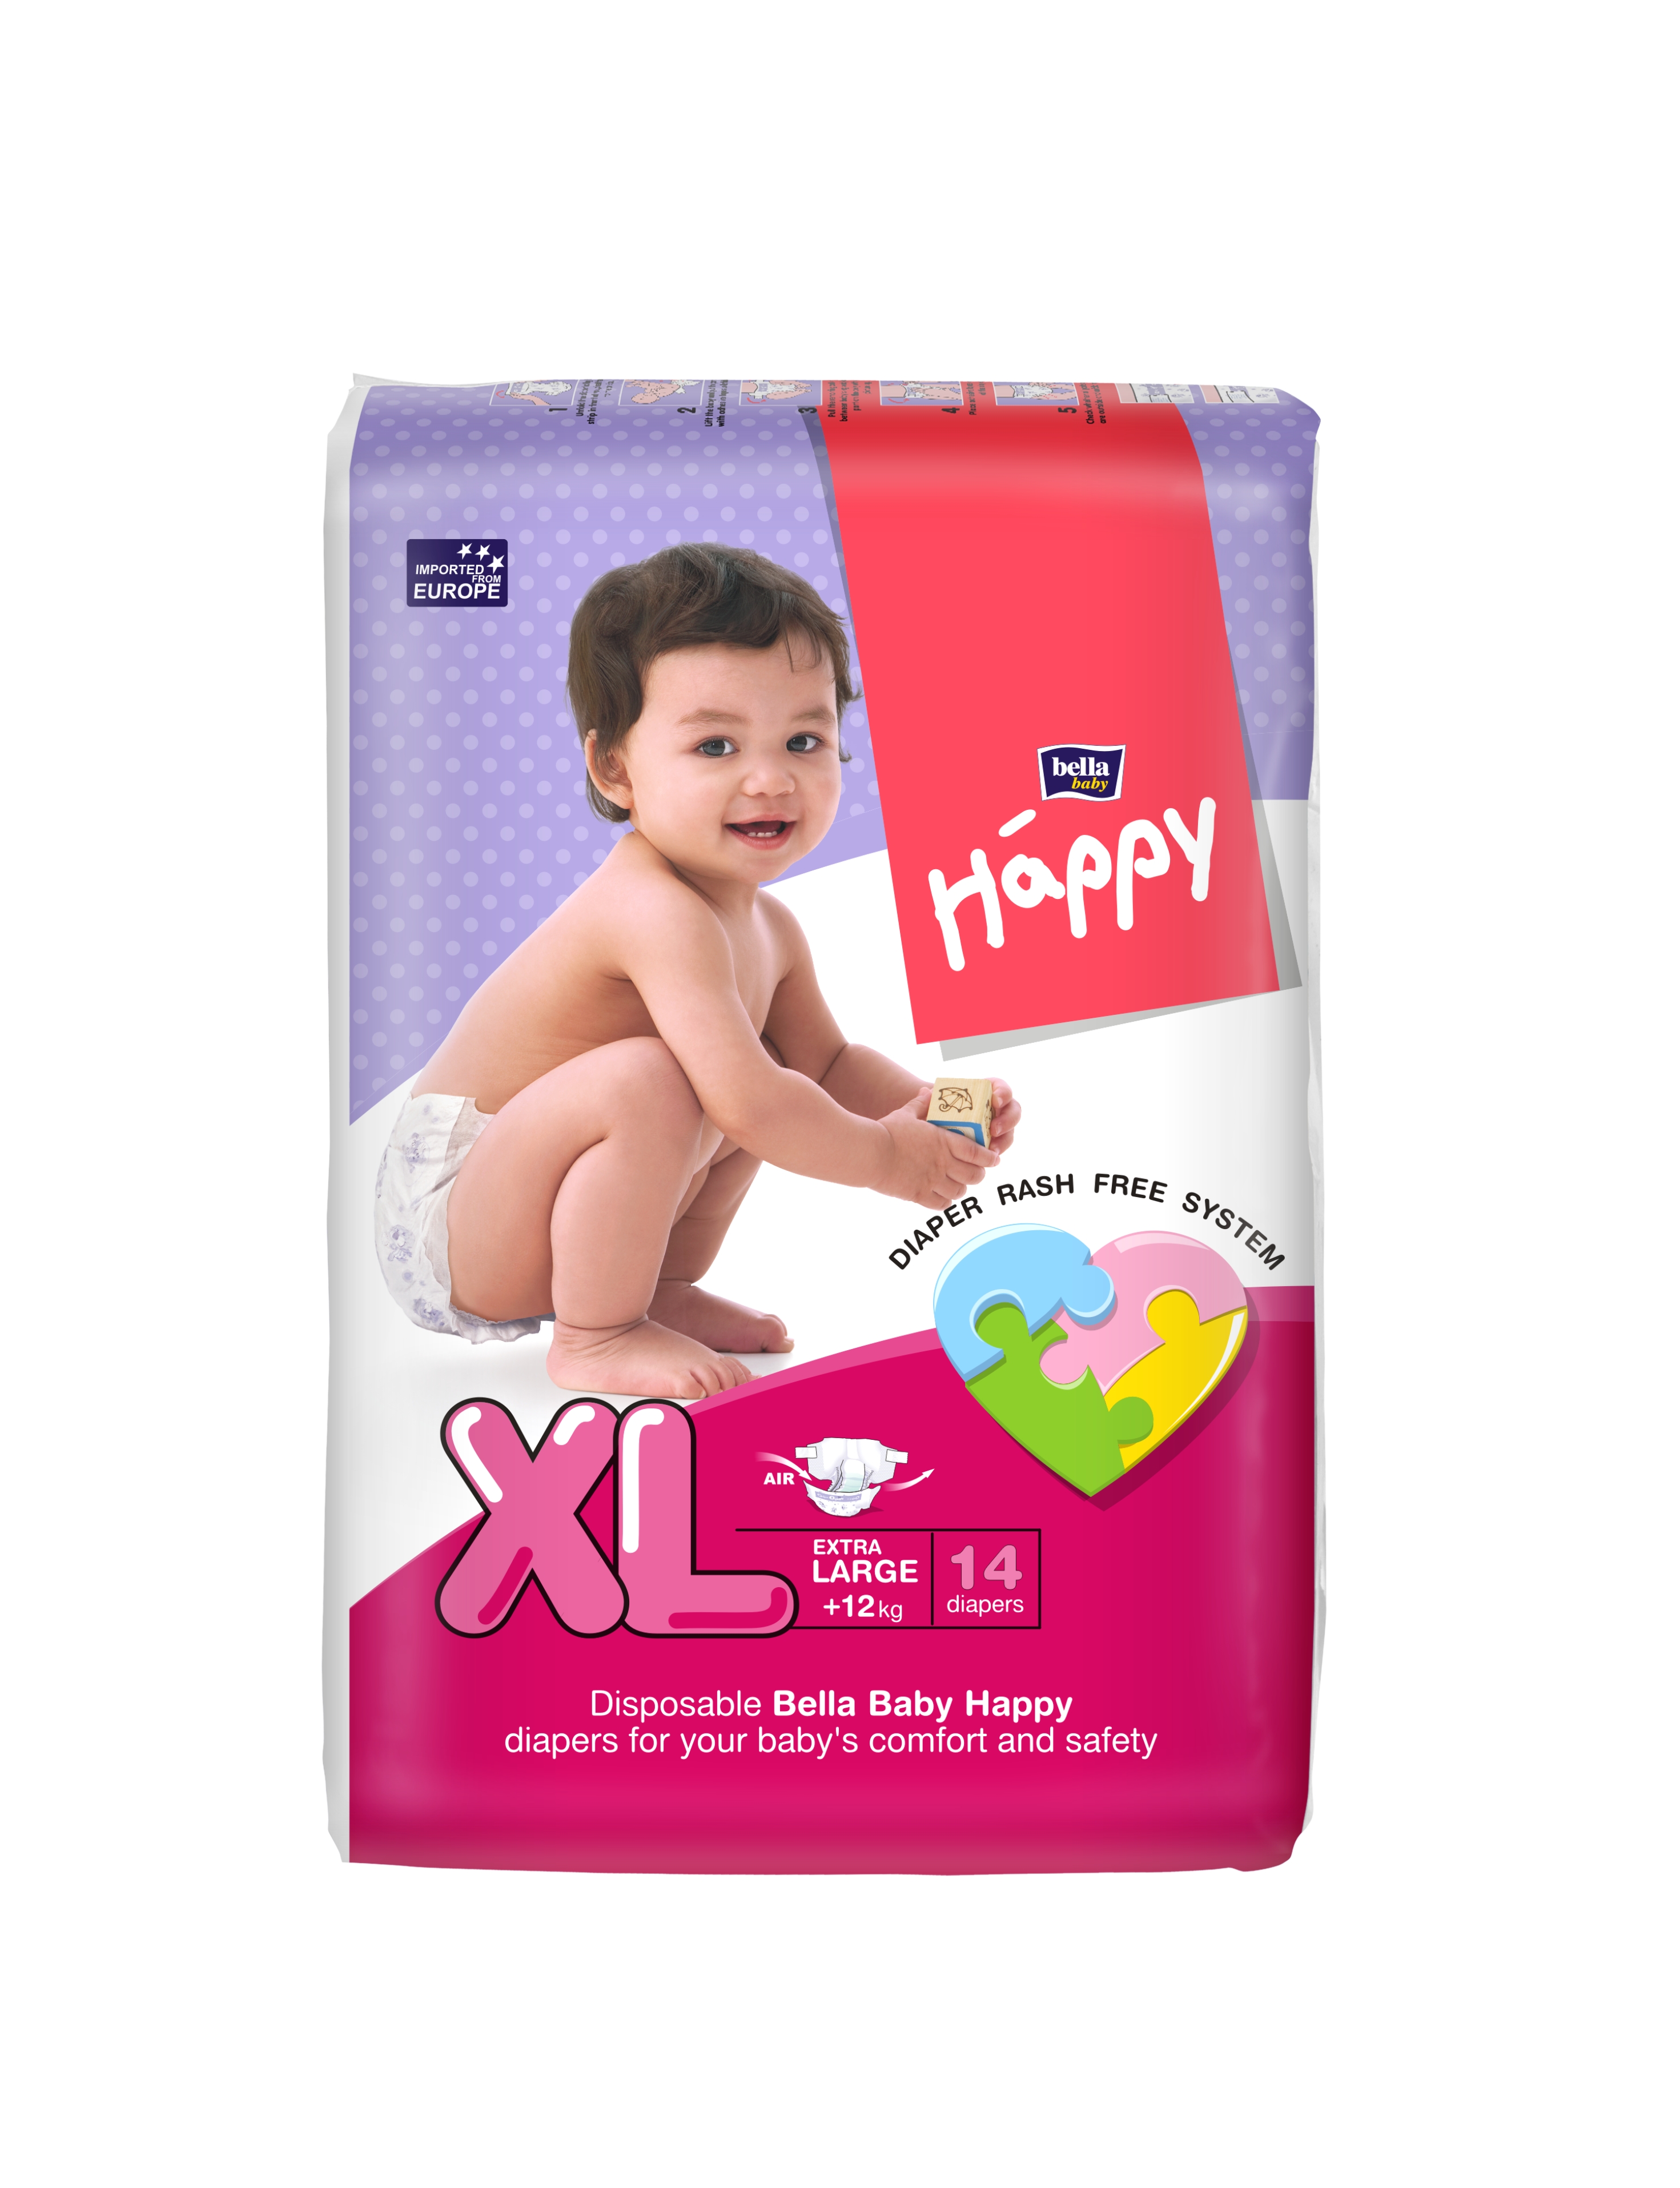 Buy BELLA BABY HAPPY DIAPERS EXTRA LARGE 14 PCS at Best Price Online